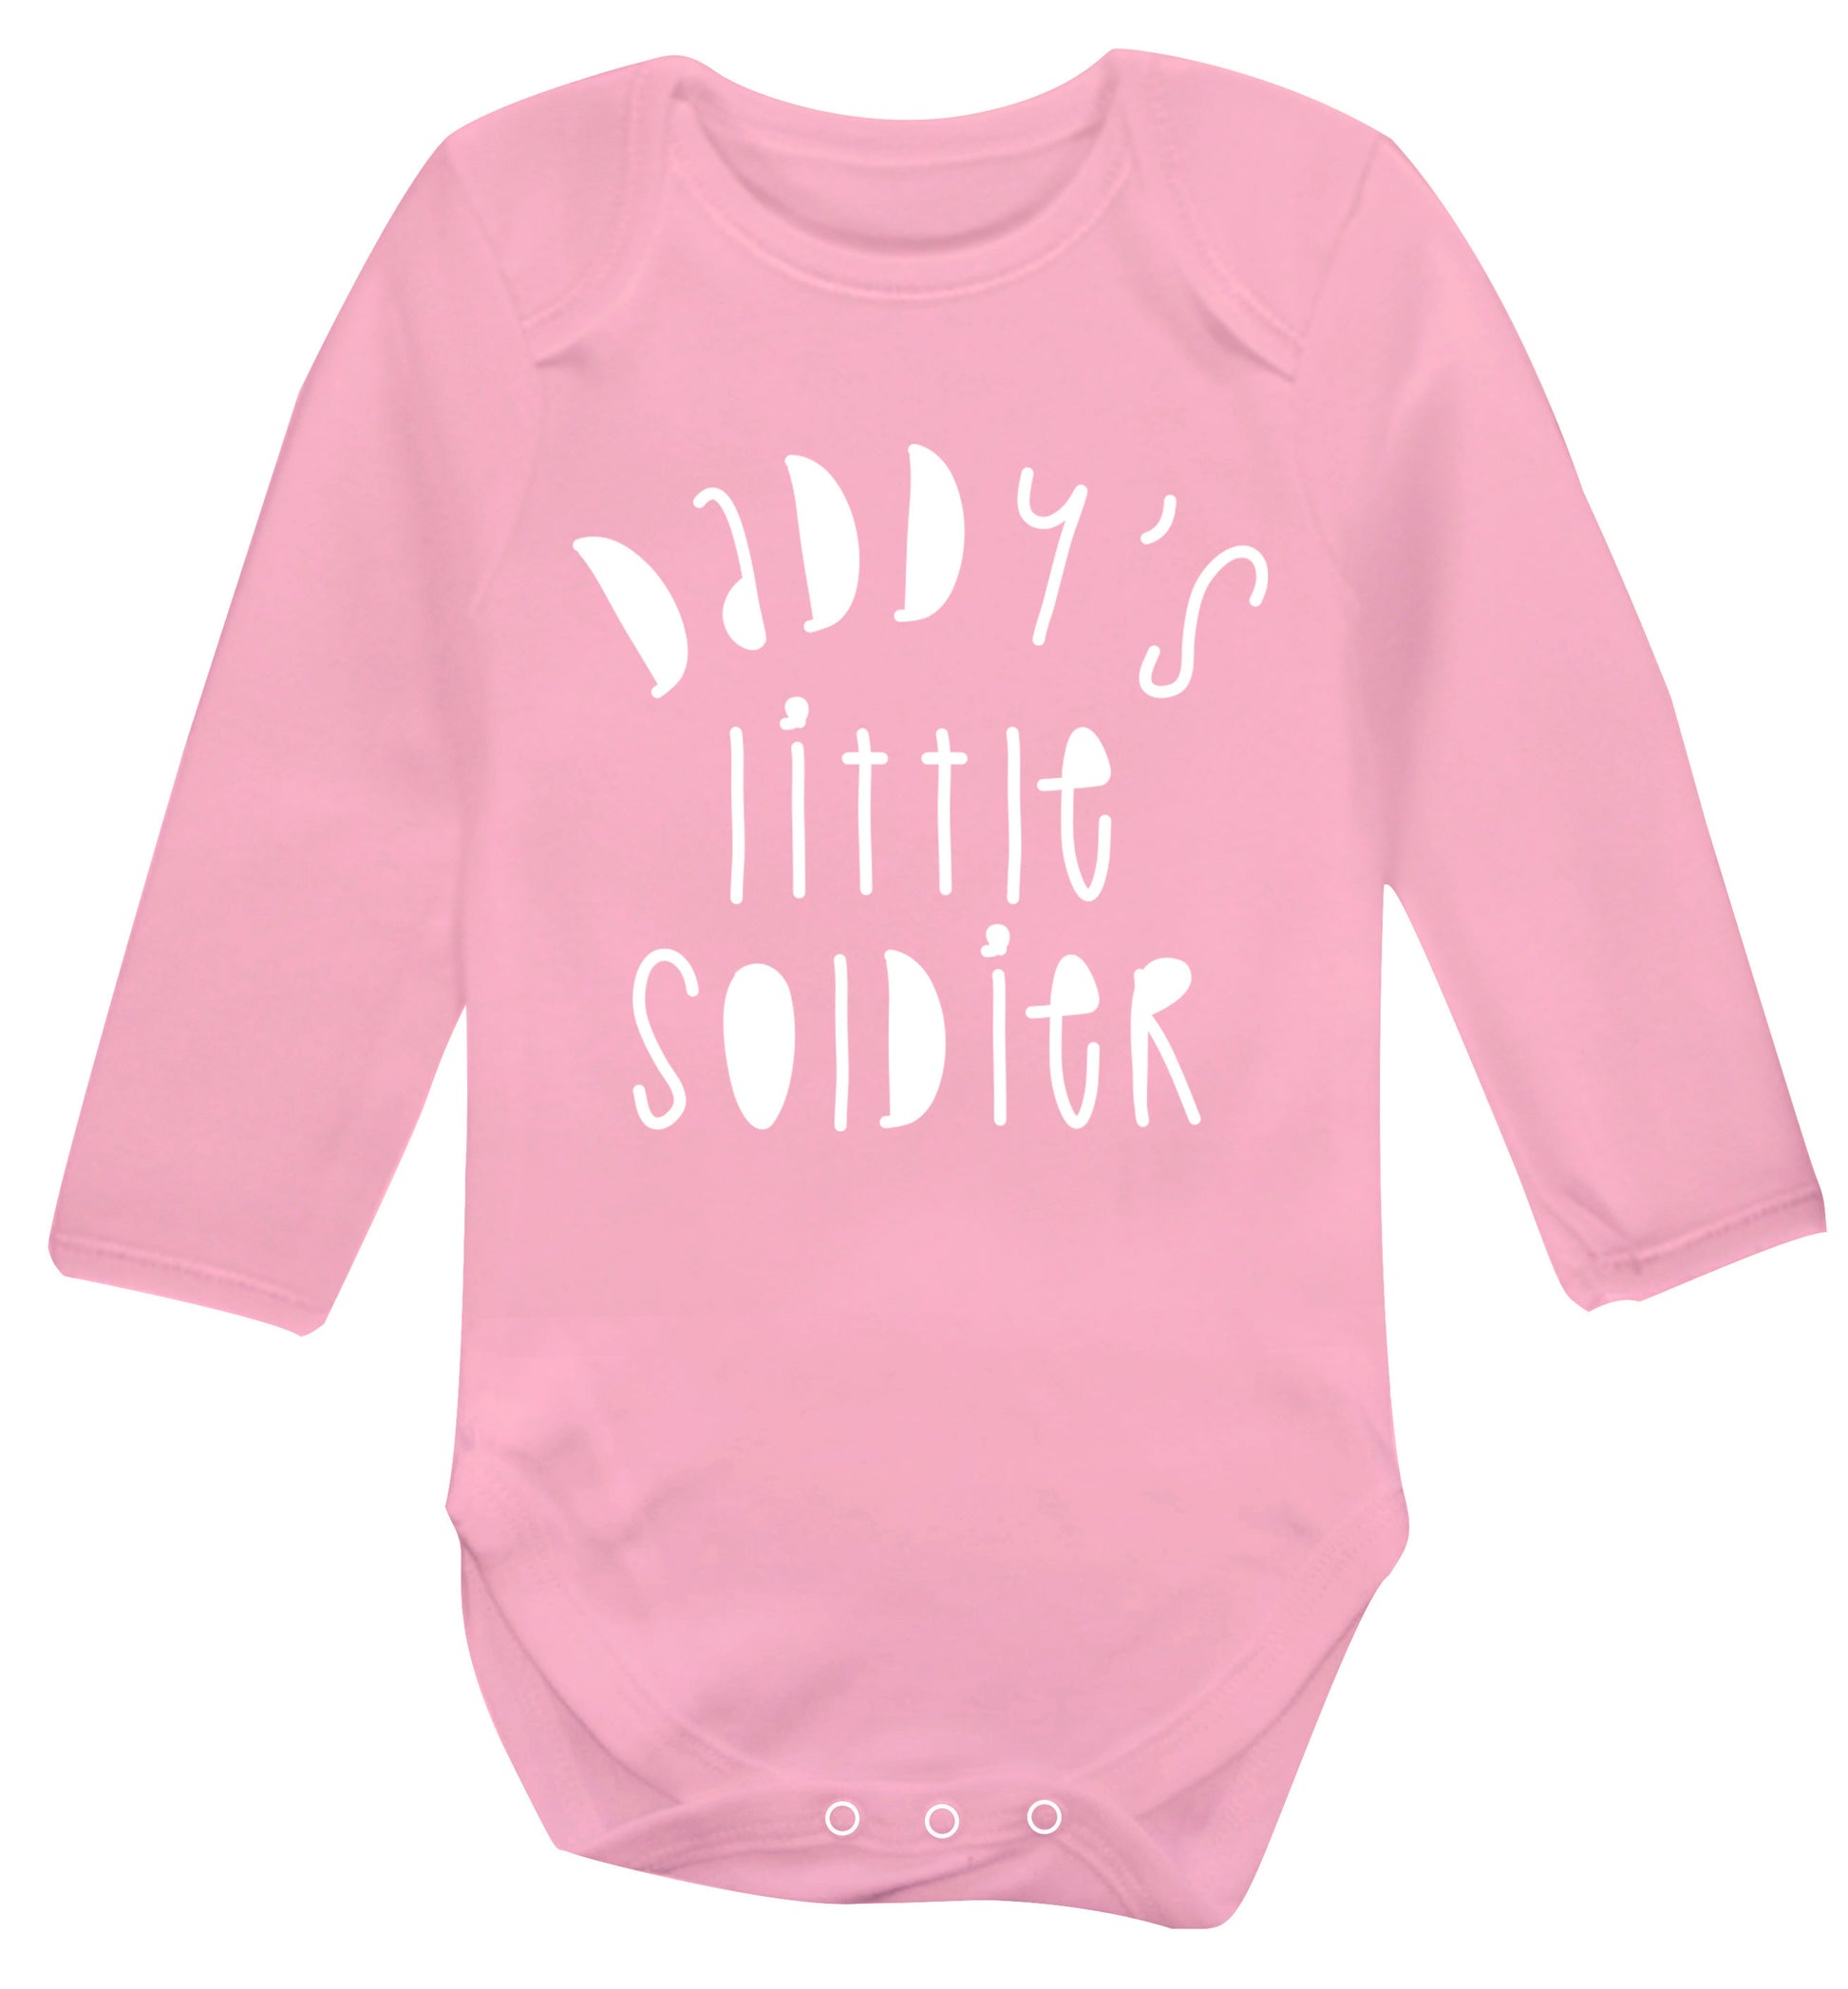 Daddy's little soldier Baby Vest long sleeved pale pink 6-12 months